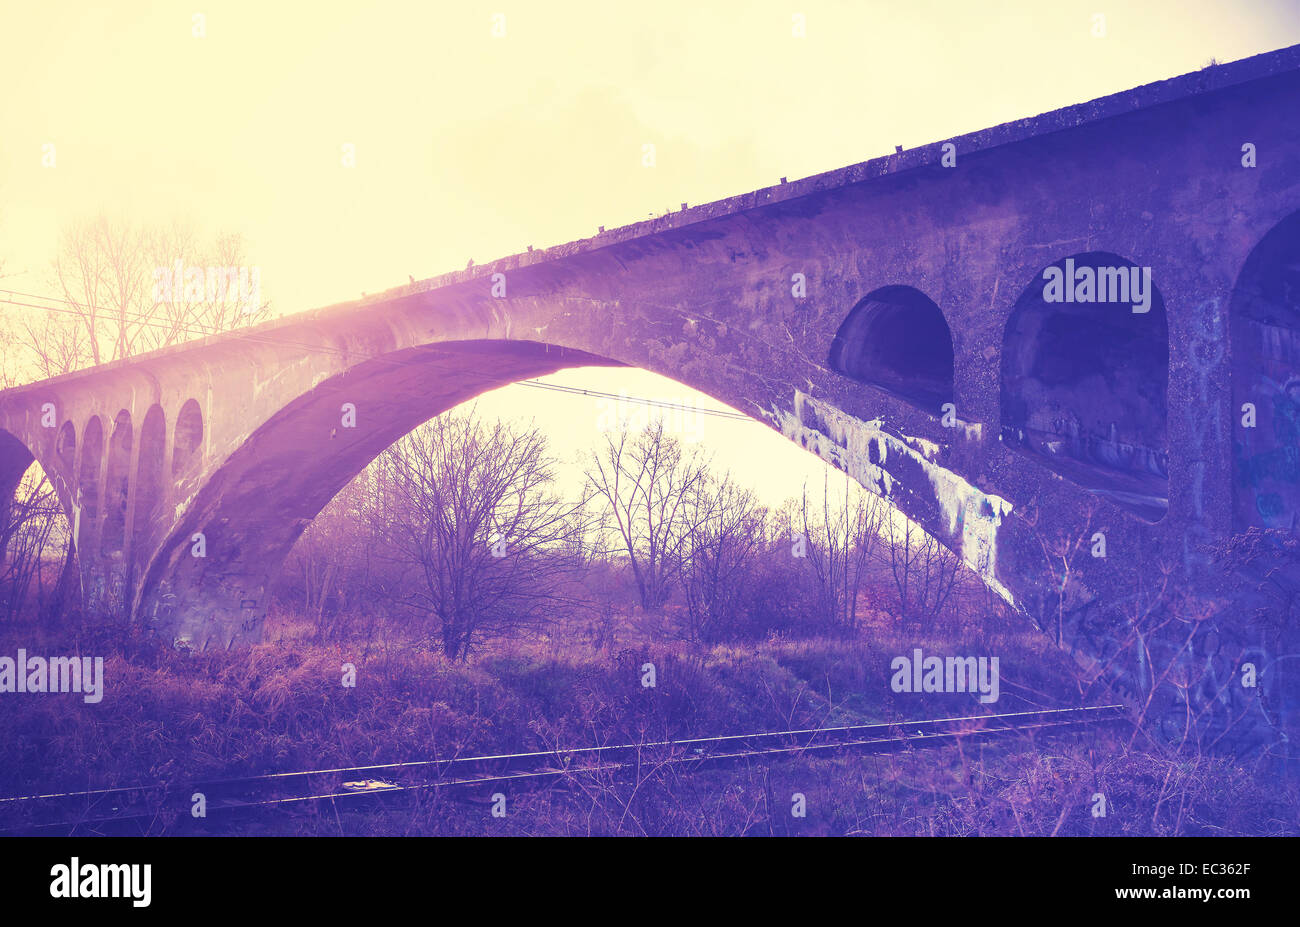 Retro vintage filtered picture of an arch bridge. Stock Photo